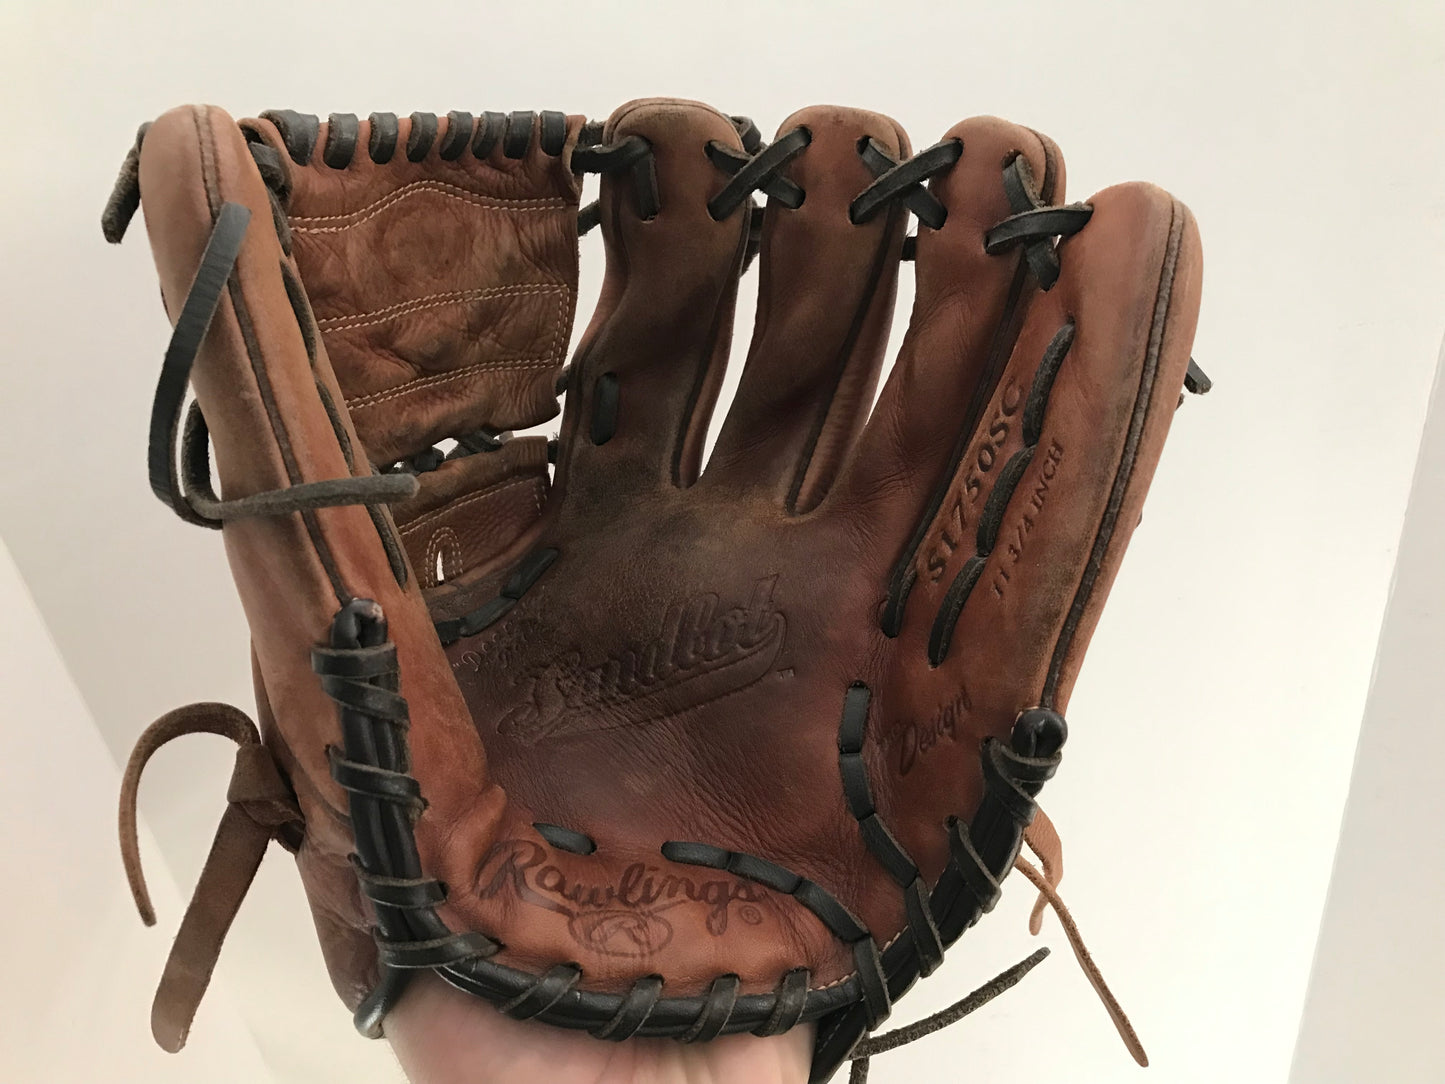 Baseball Glove Adult Size 11.75 inch Rawlings Brown Leather Fits on Left Hand Excellent Quality